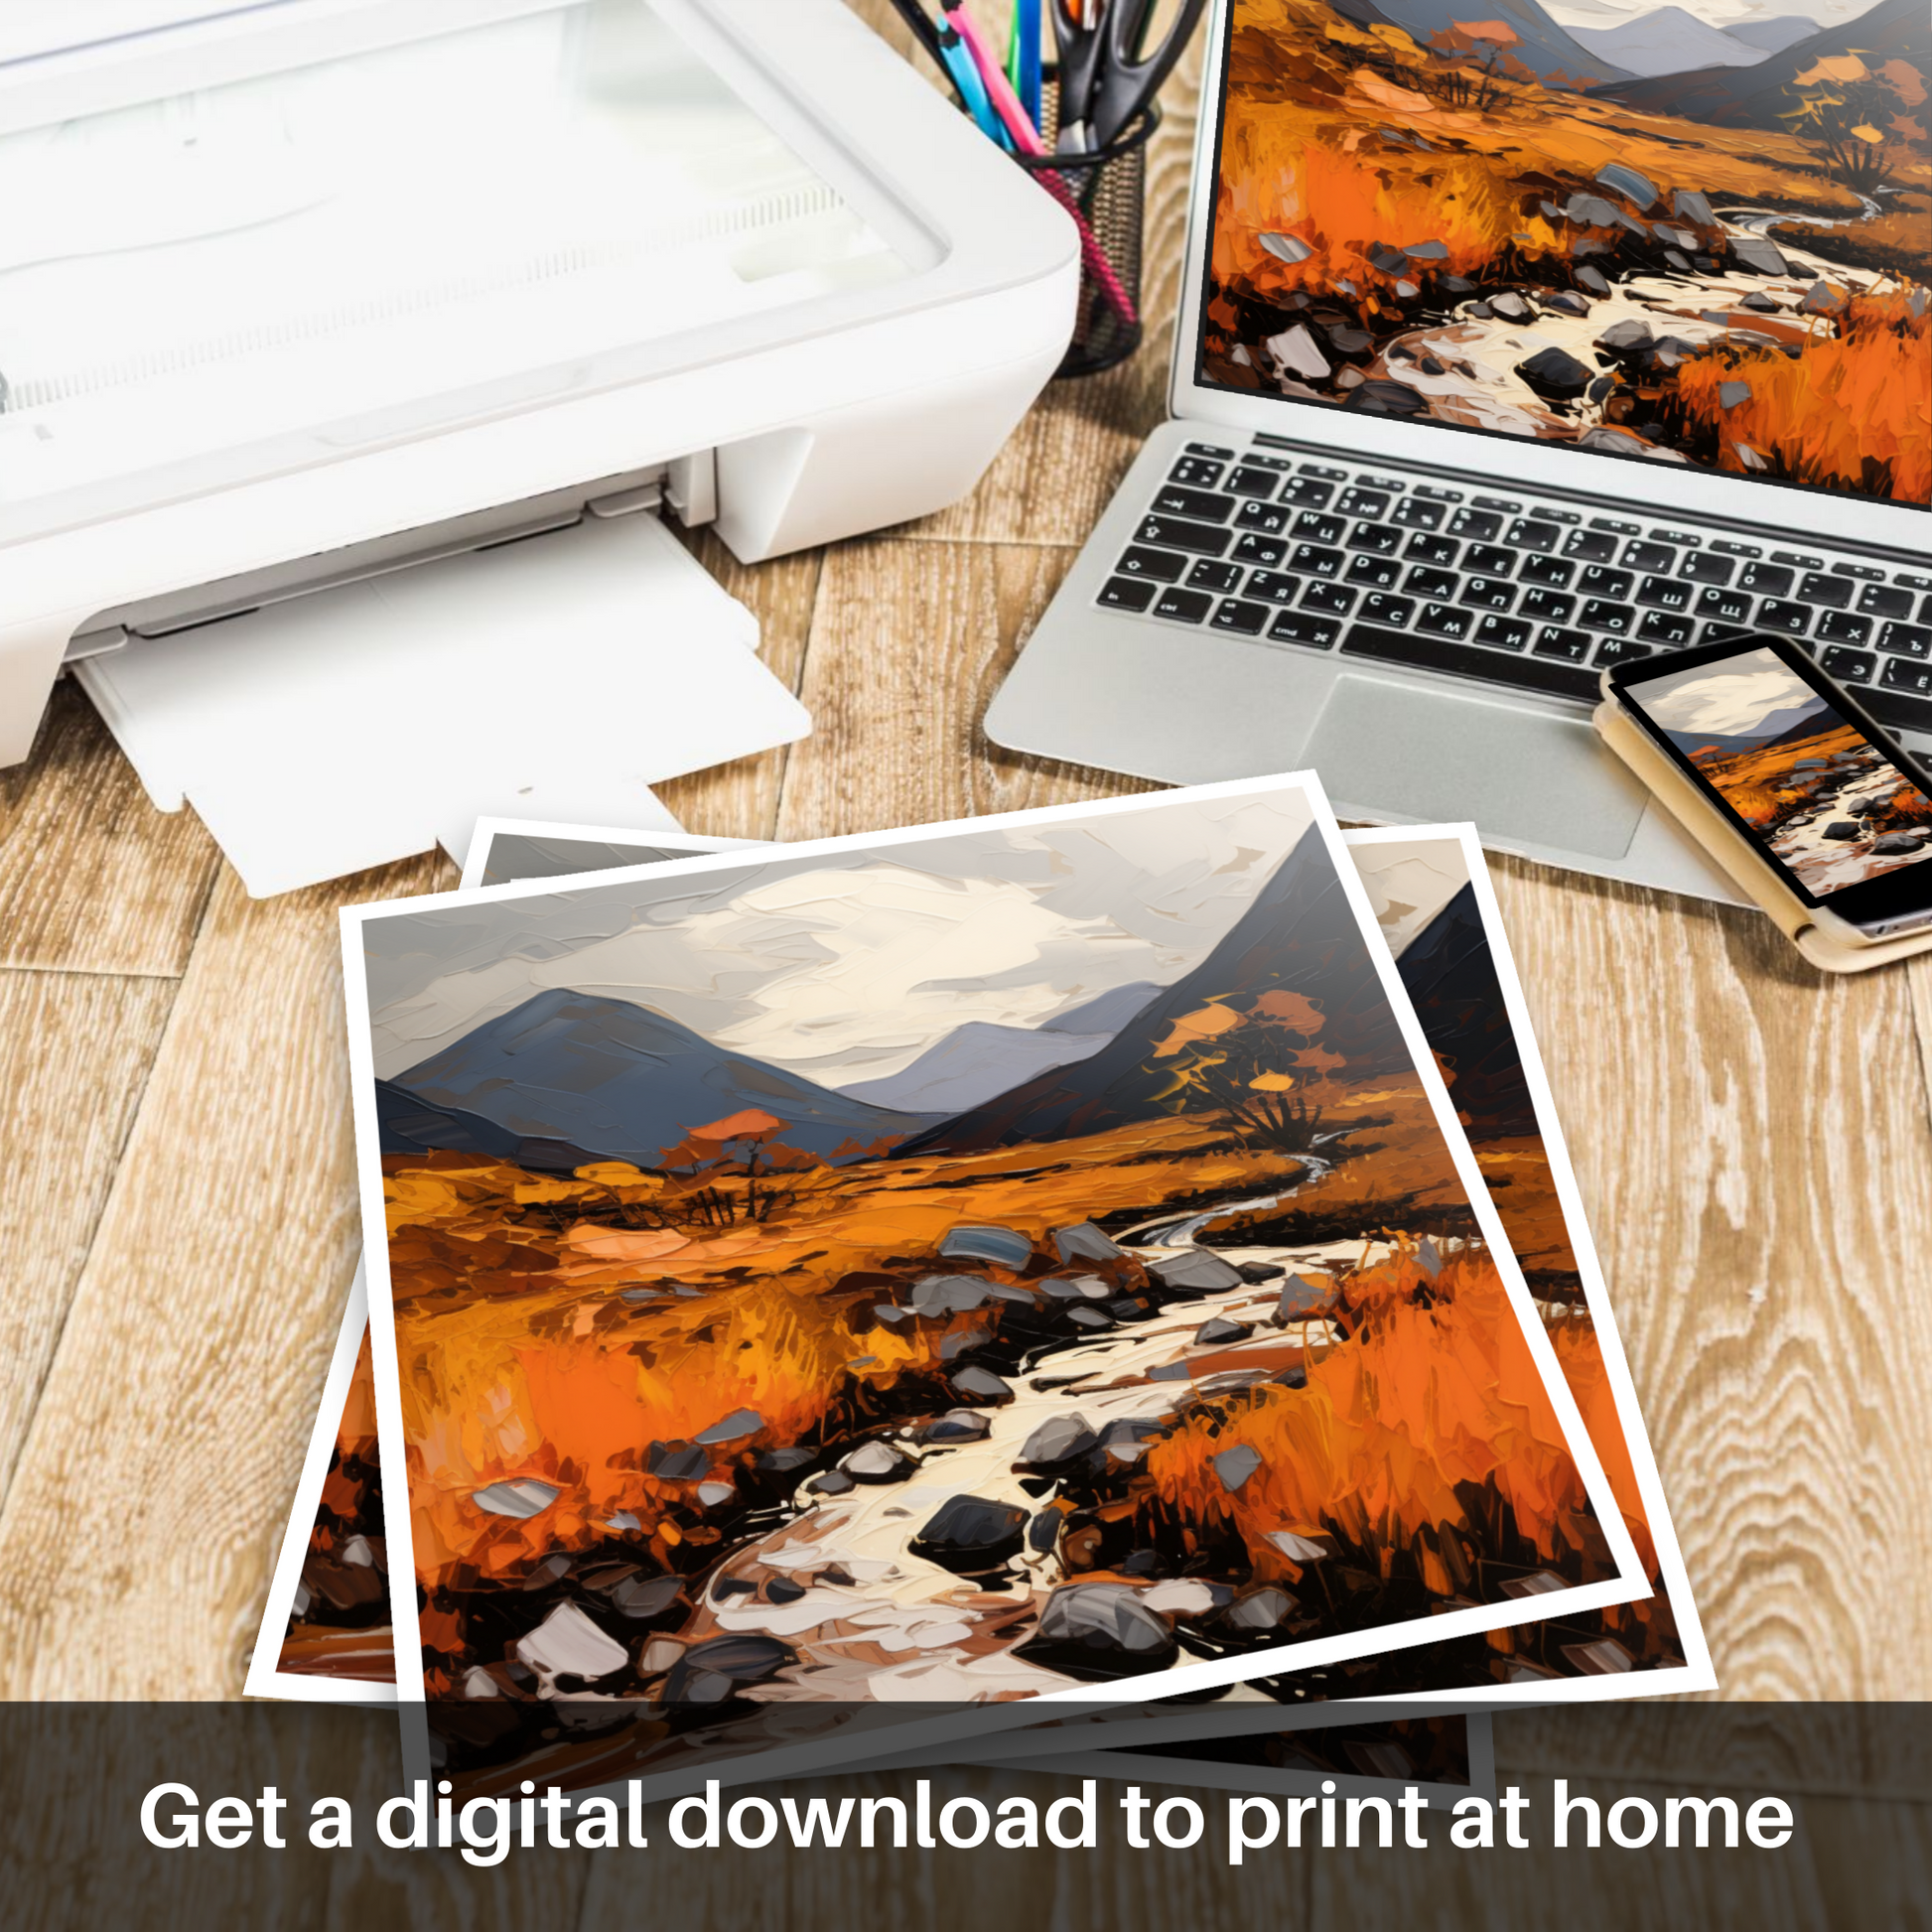 Downloadable and printable picture of Autumn hues in Glencoe